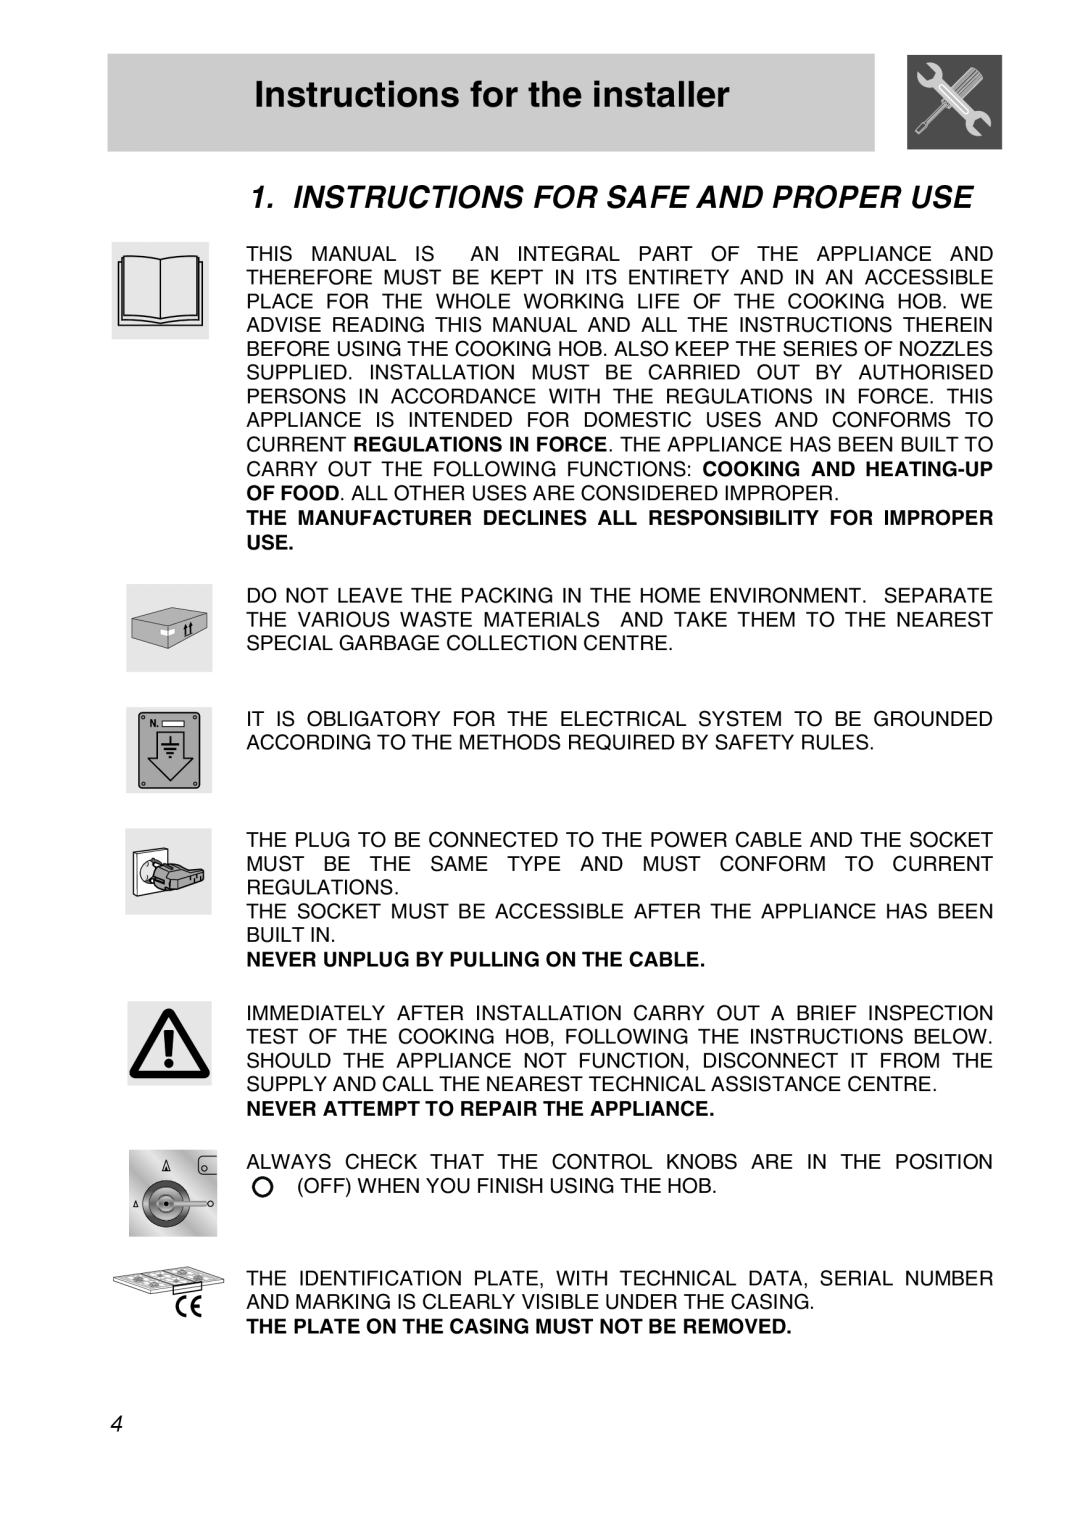 Smeg PGA95SC3 Instructions for the installer, Instructions For Safe And Proper Use, Never Unplug By Pulling On The Cable 